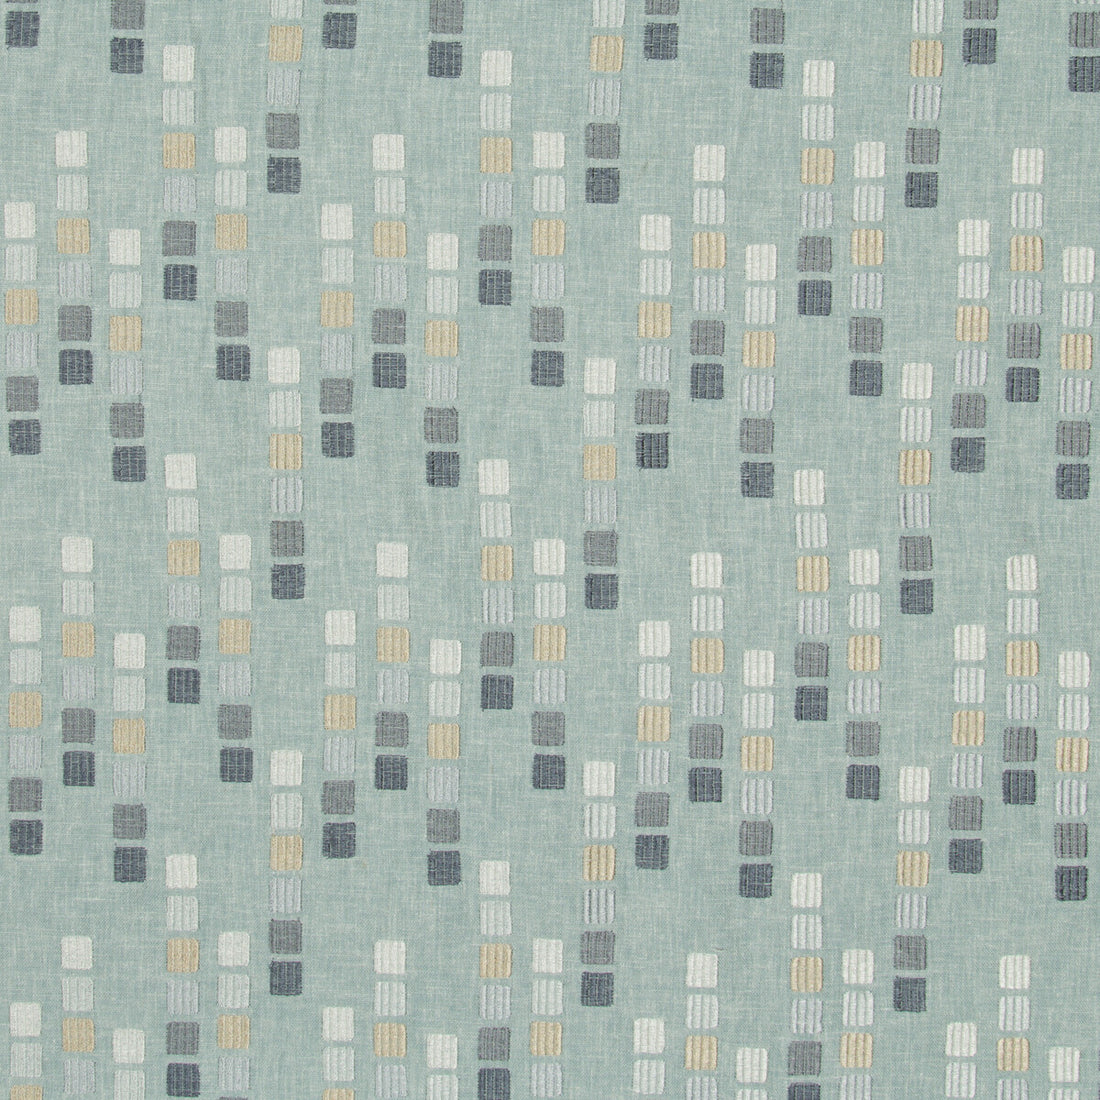 Slipstream fabric in seaspray color - pattern 34848.516.0 - by Kravet Basics in the Thom Filicia Altitude collection